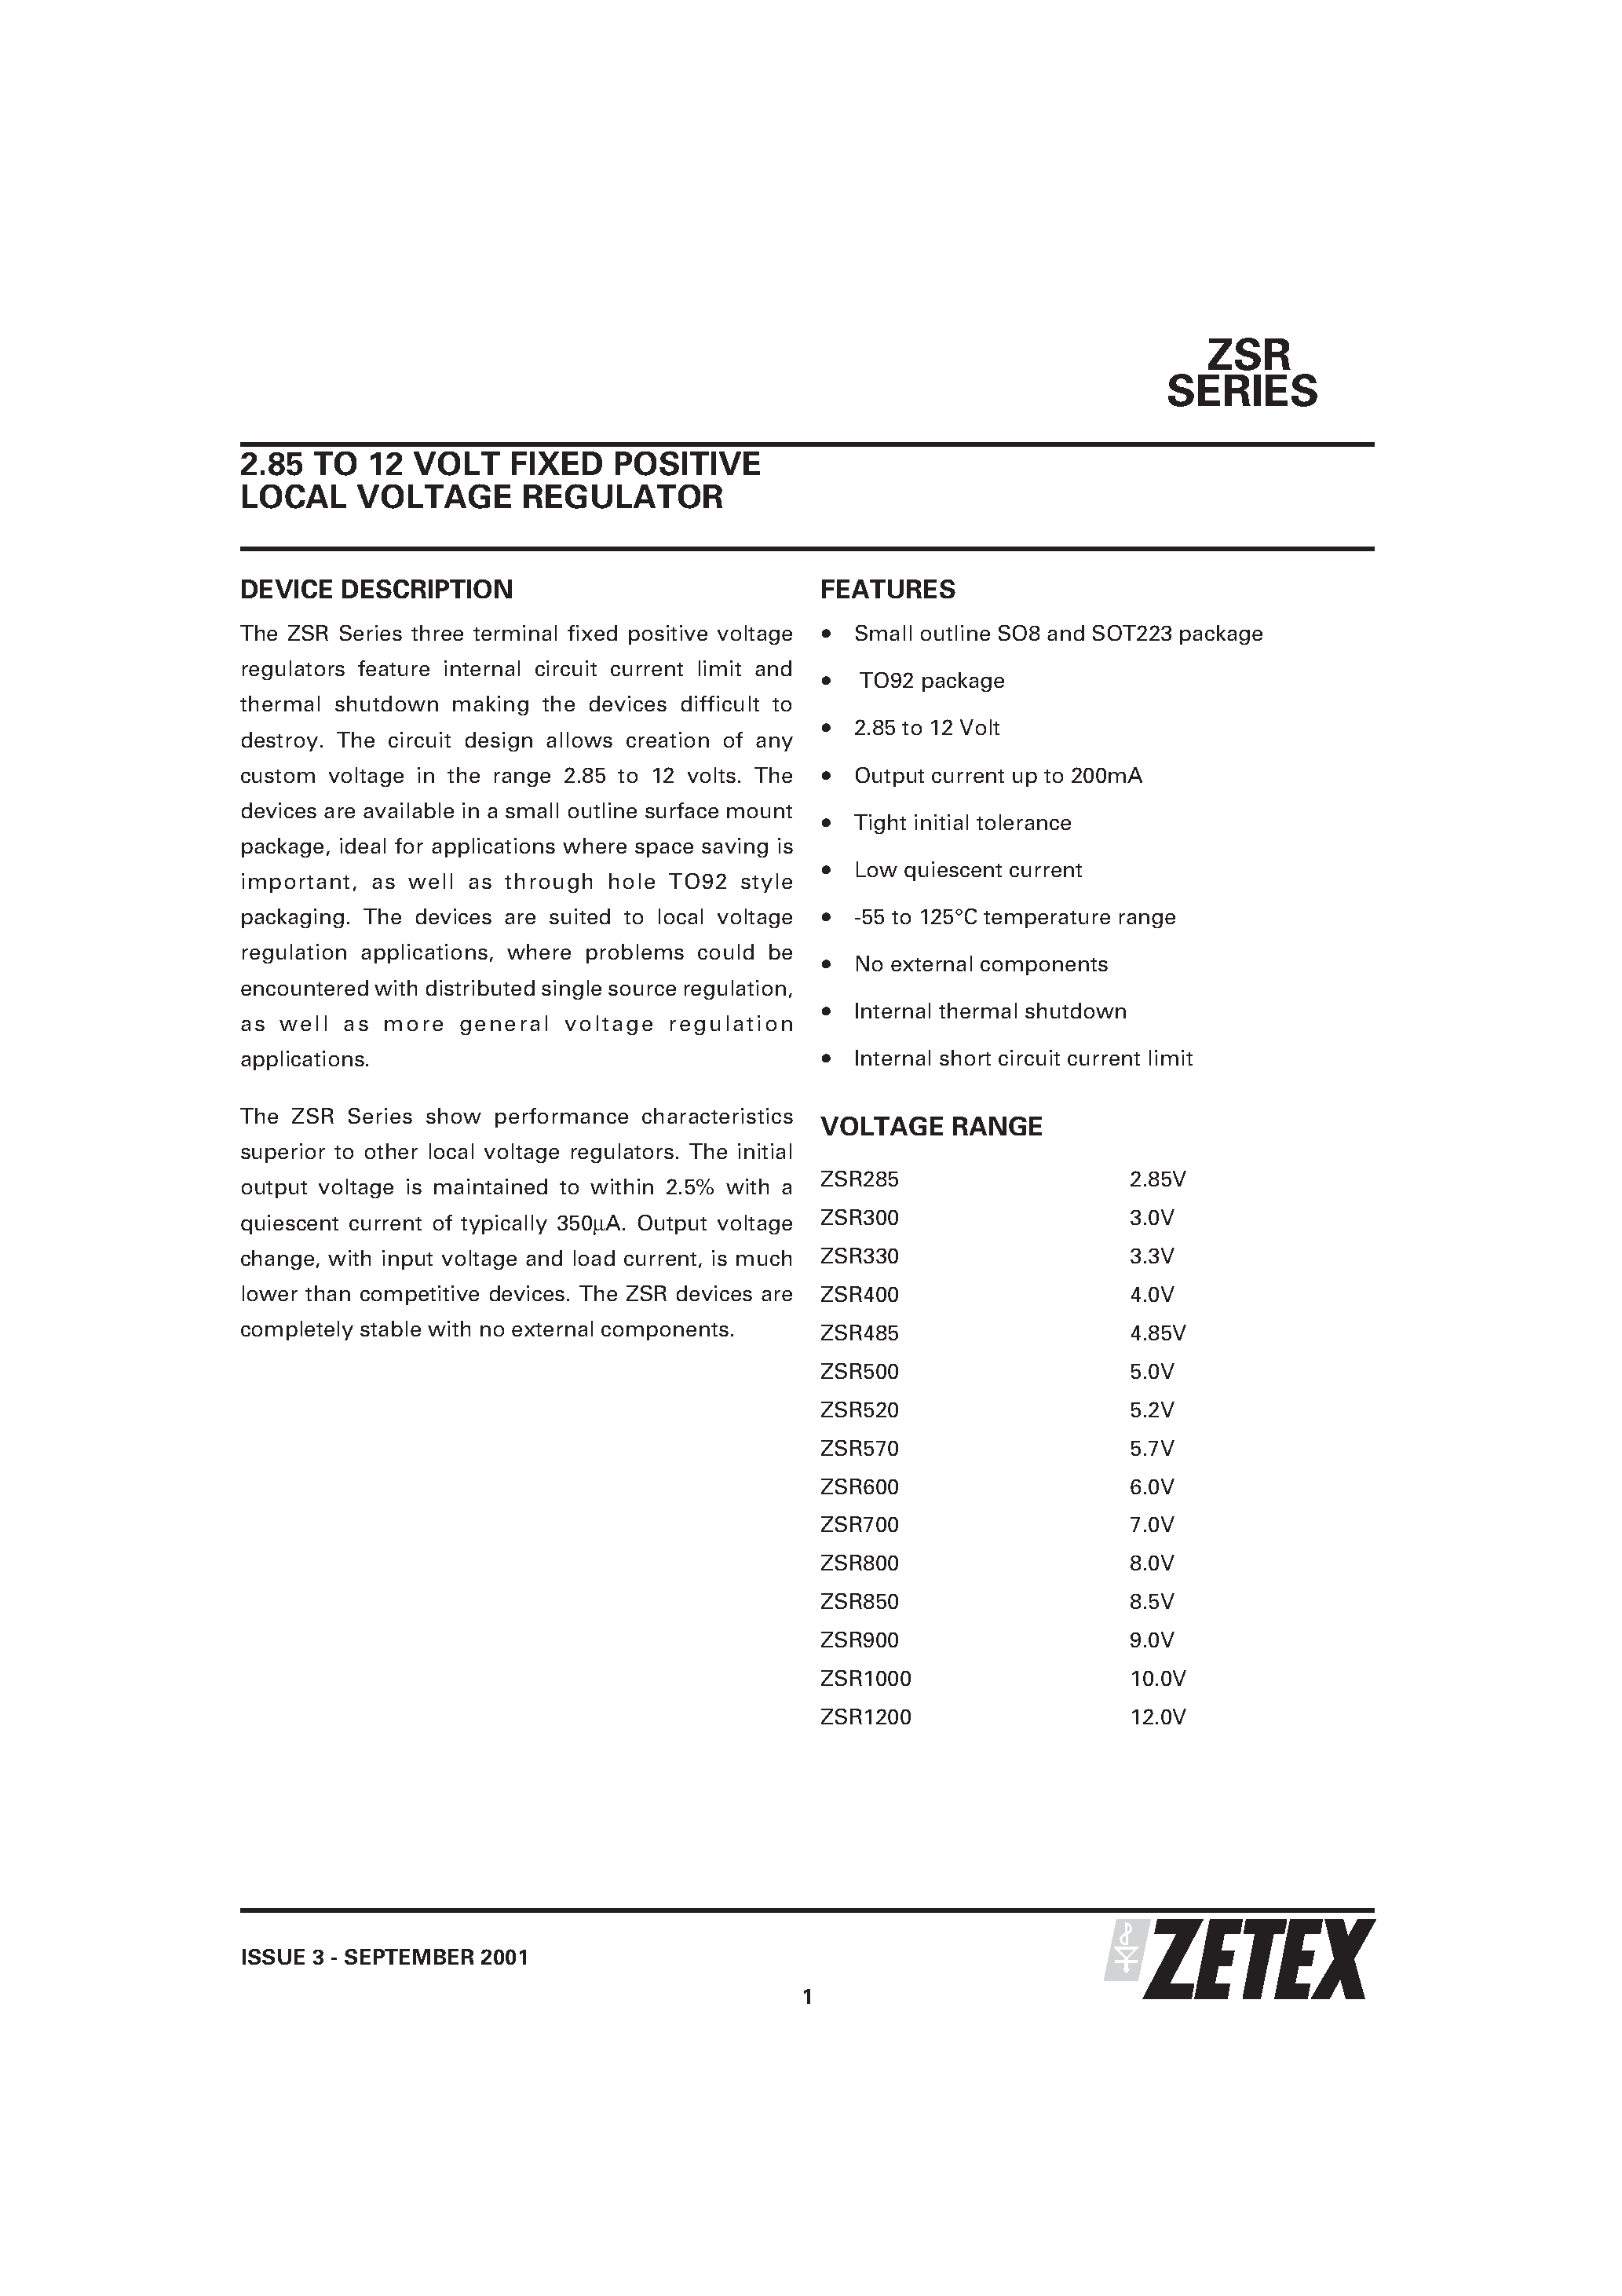 Datasheet ZSR900N8 - 2.85 TO 12 VOLT FIXED POSITIVE LOCAL VOLTAGE REGULATOR page 1